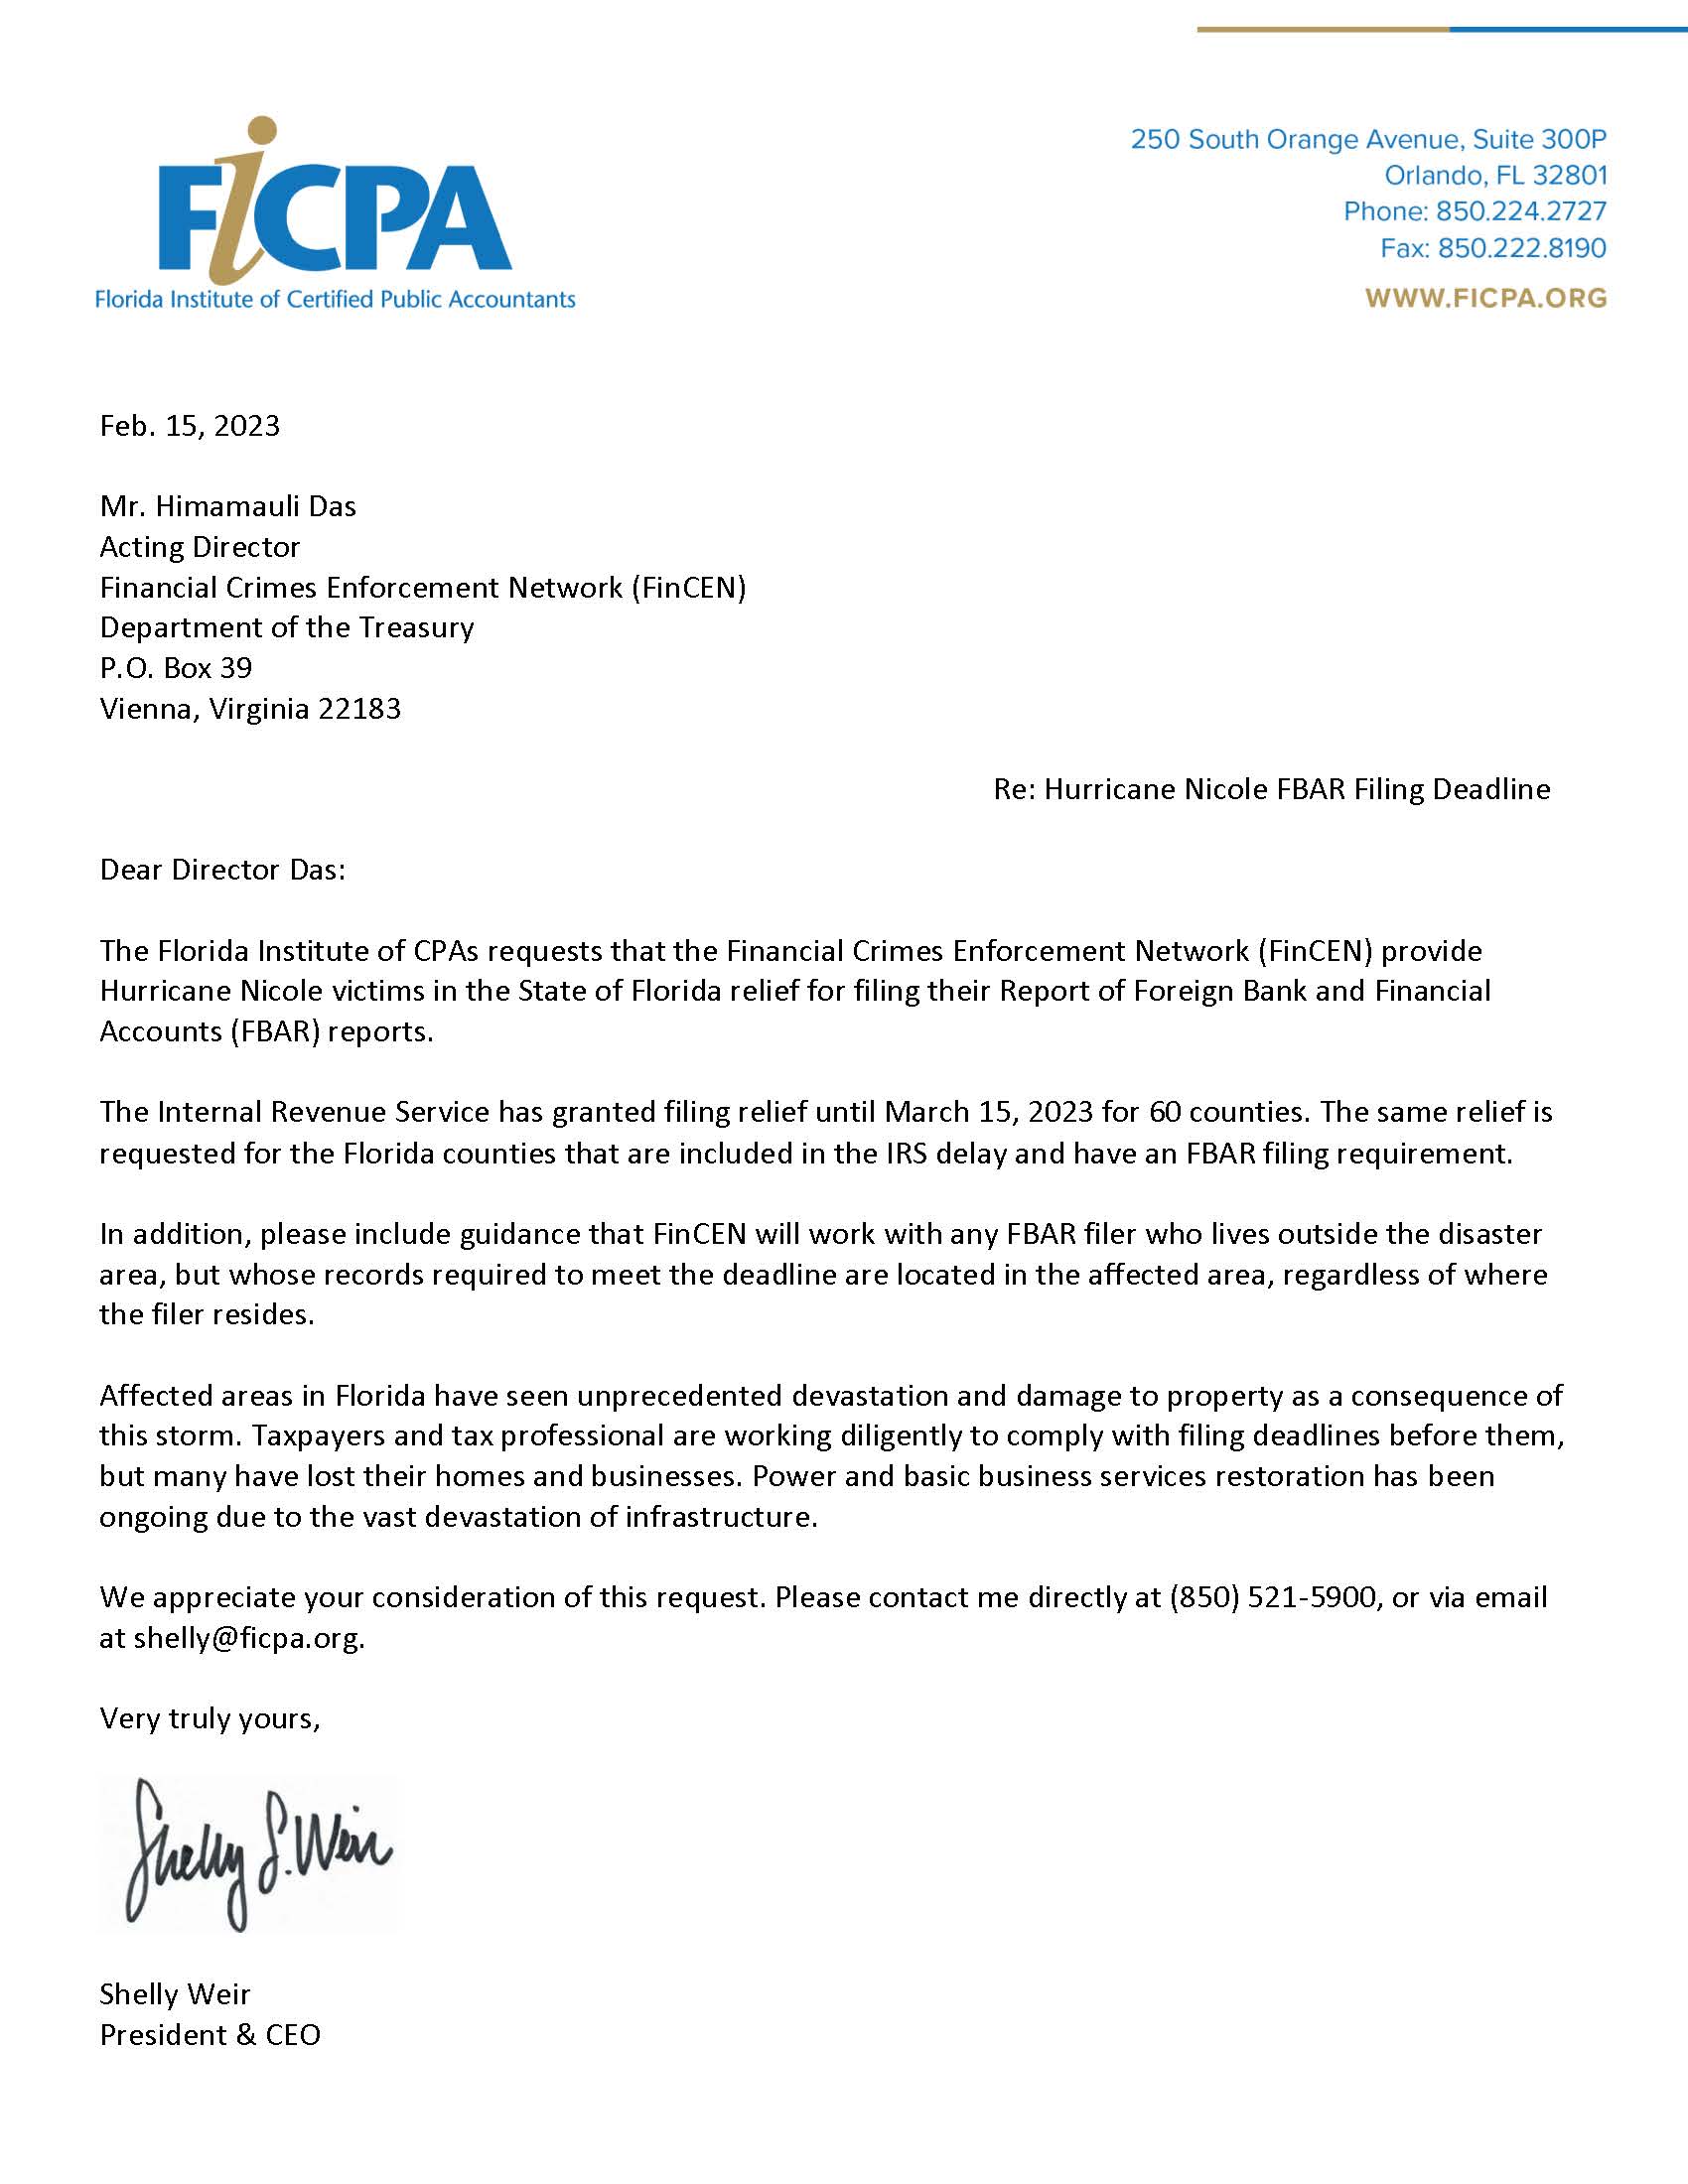 FICPA_Letter to FinCEN_2-15-2023.jpg